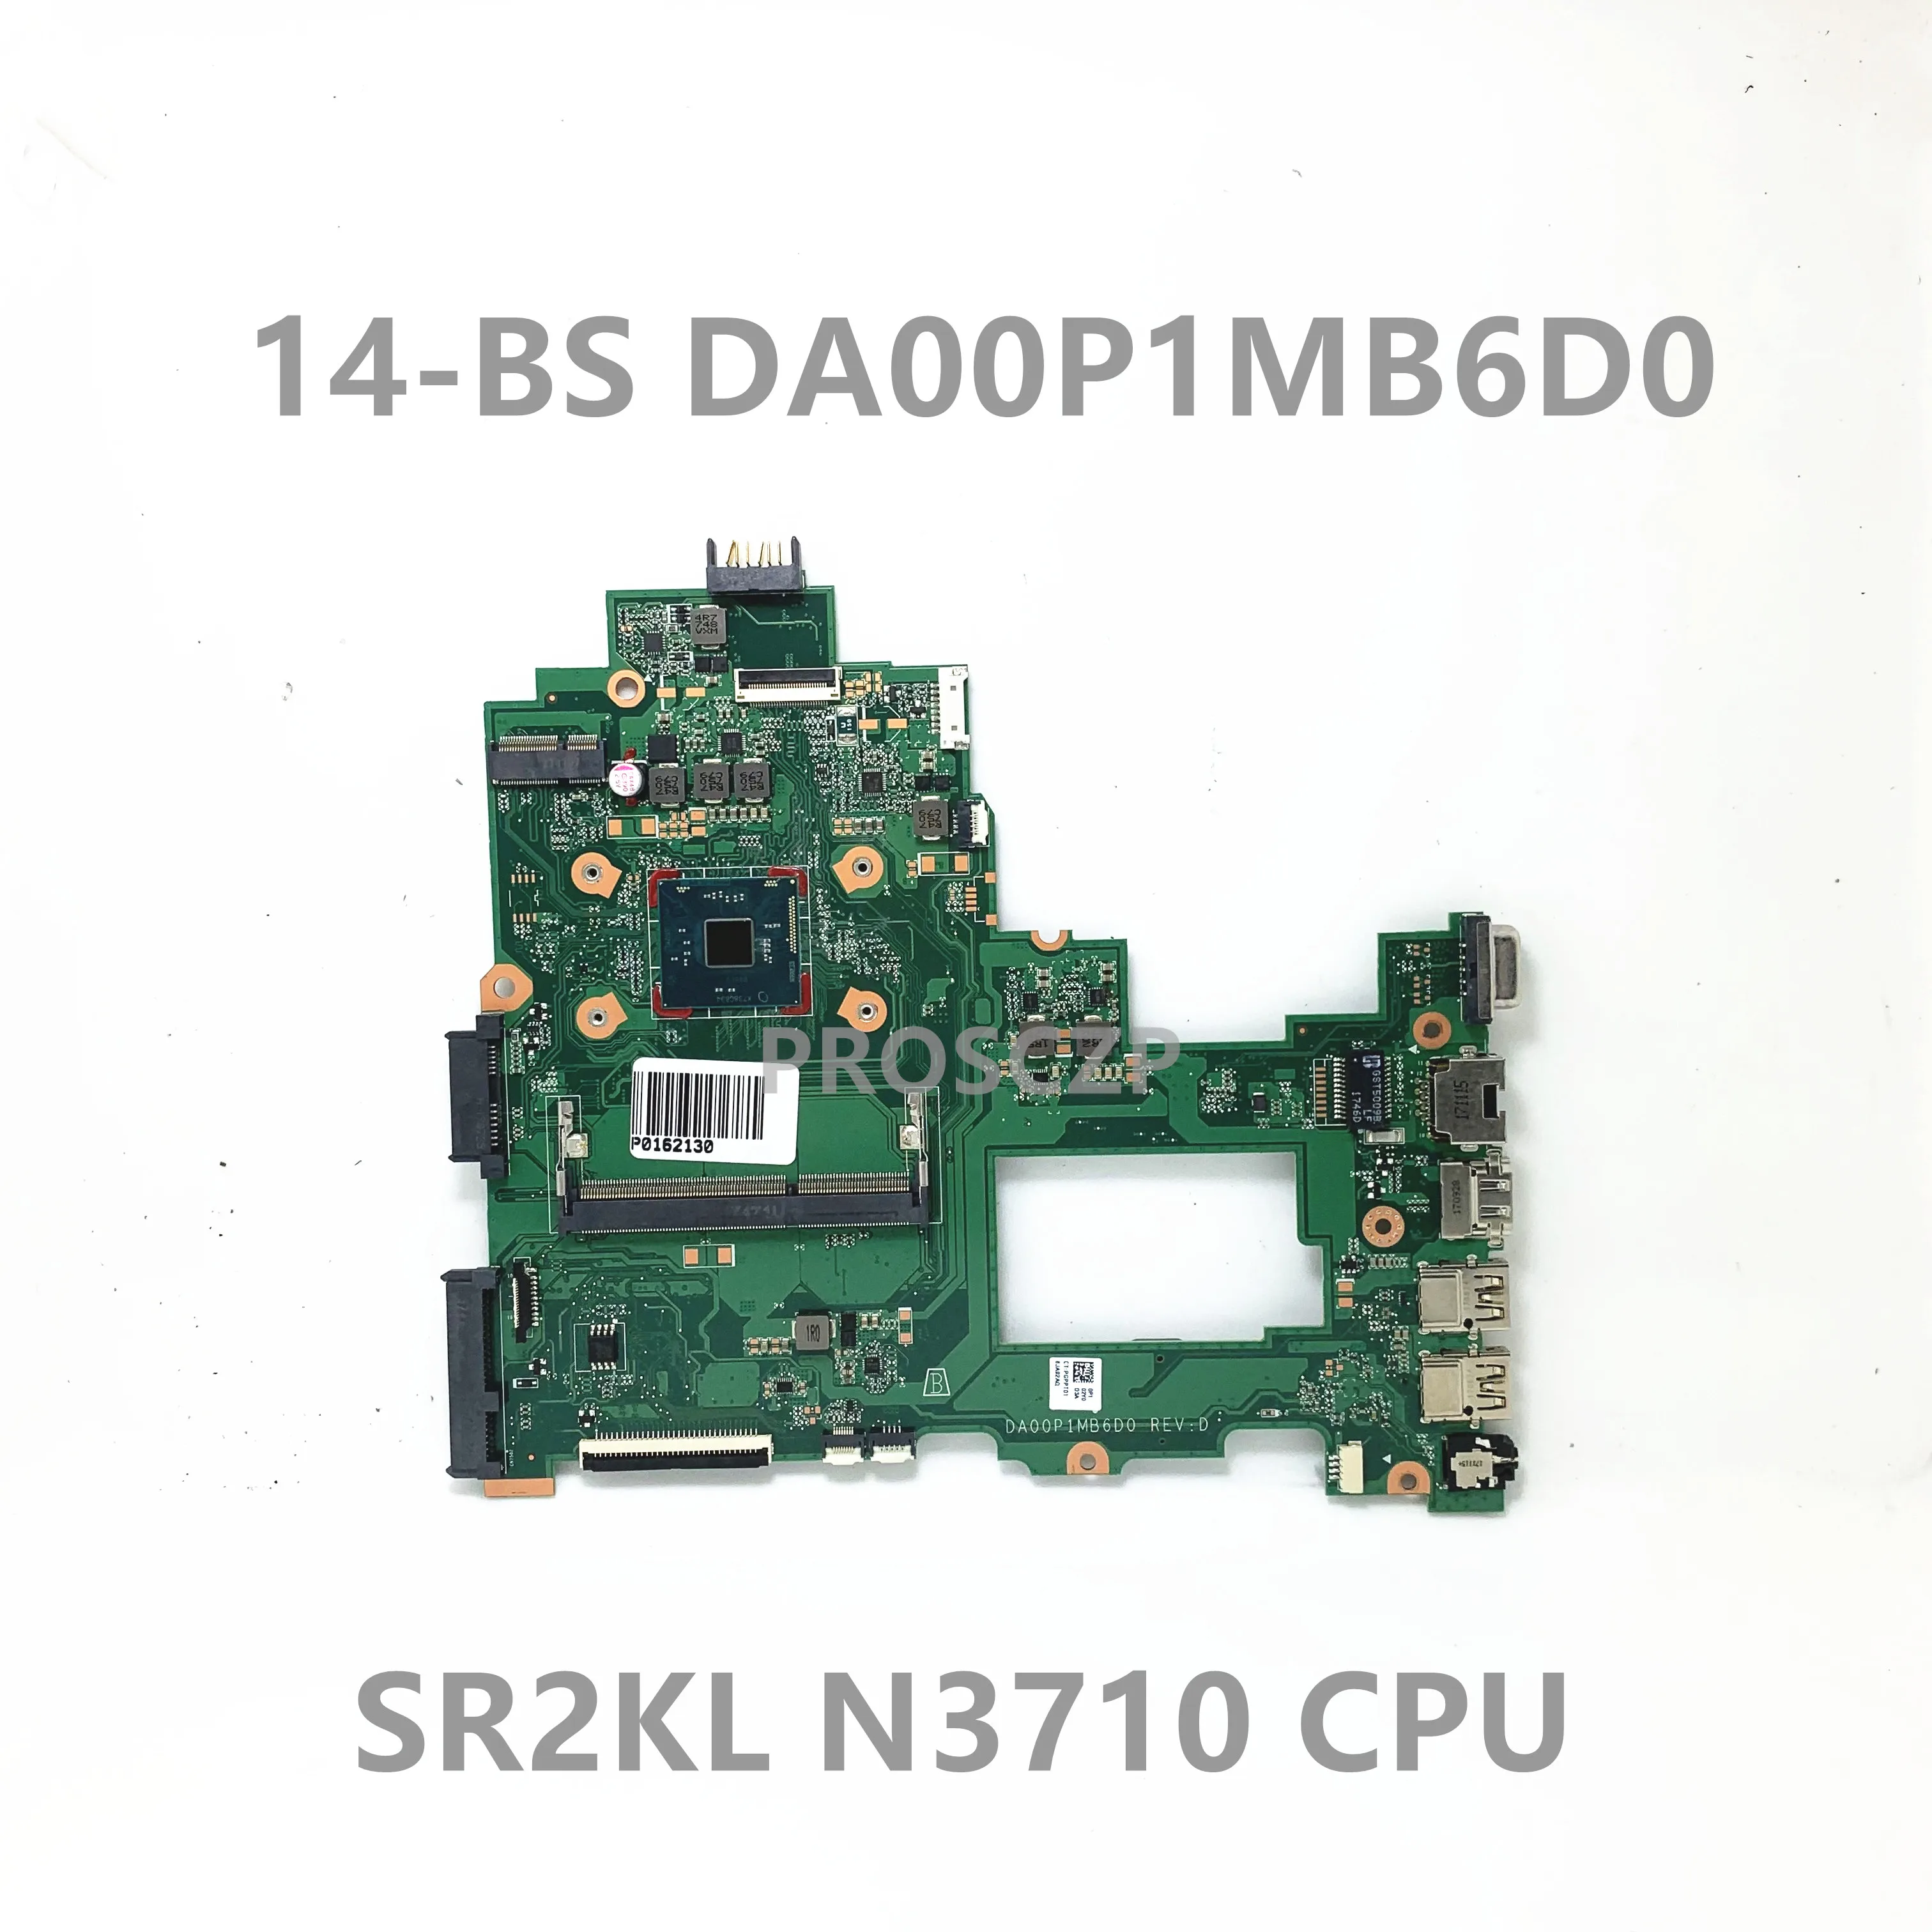 

DA00P1MB6D0 High Quality Mainboard For HP Pavilion 240 G6 246 G6 14-BS Laptop Motherboard With SR2KL N3710 CPU 100% Working Well